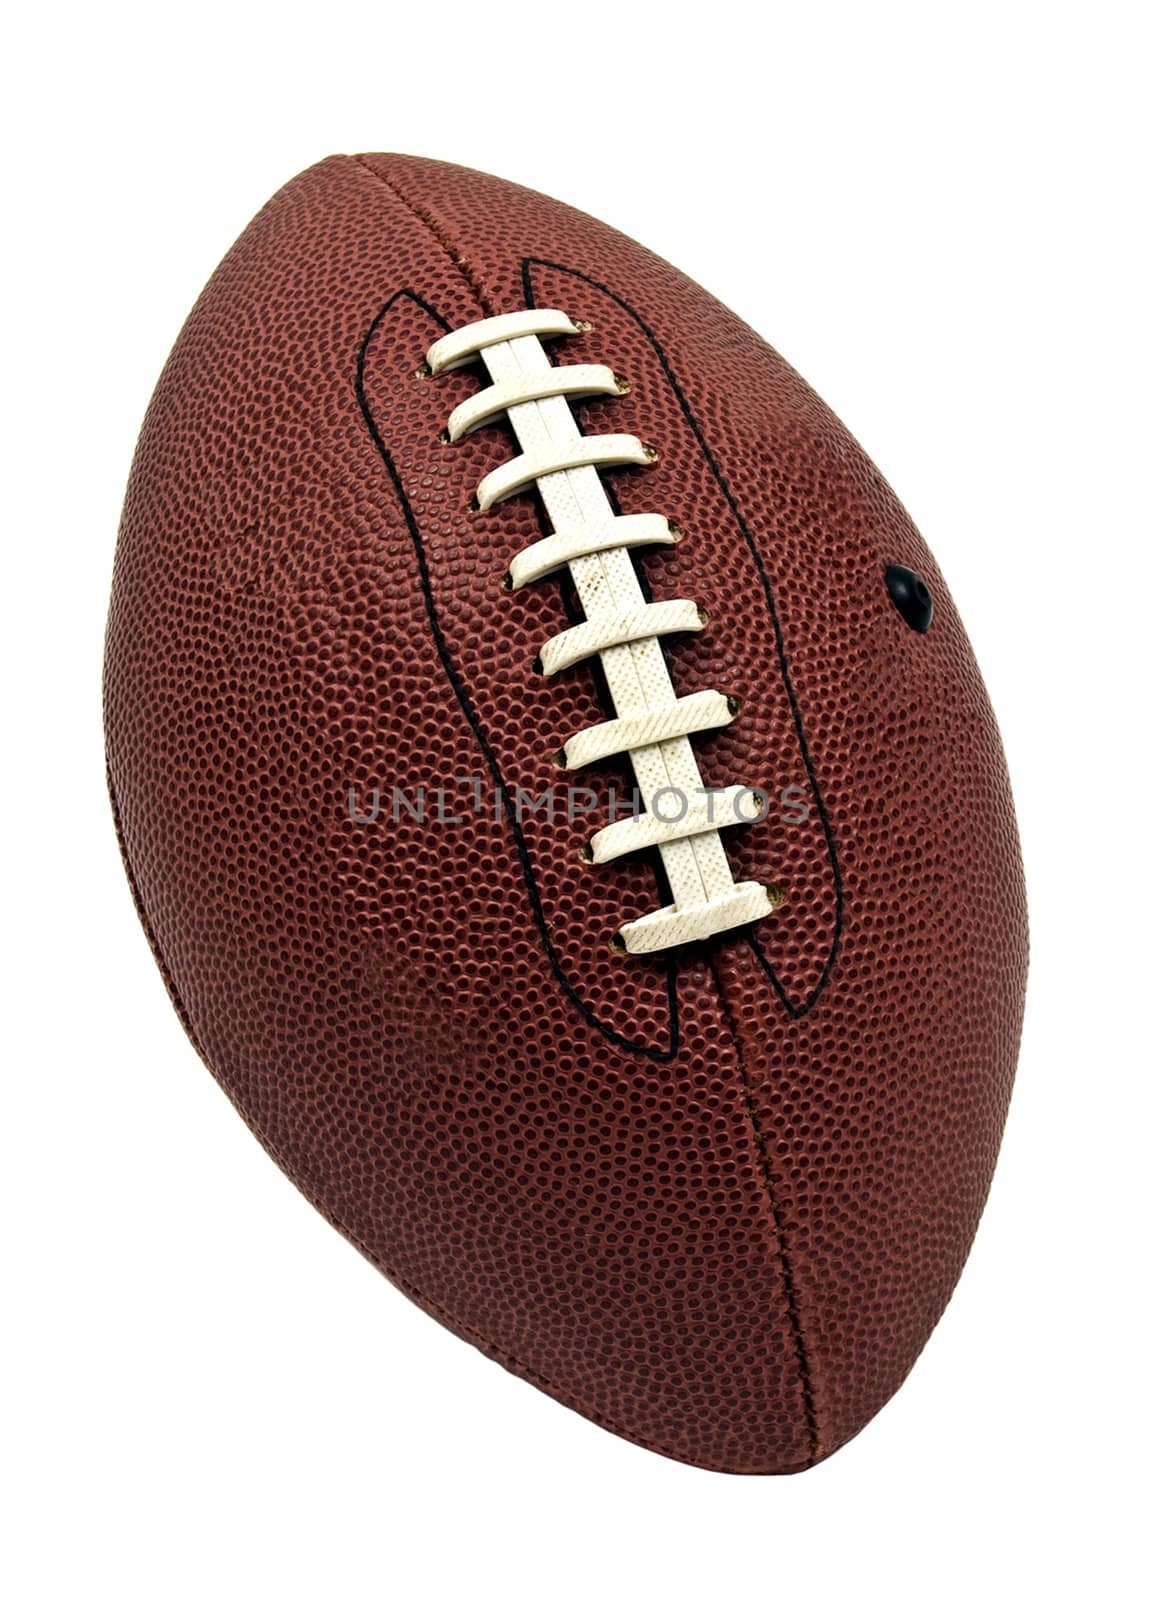 American Football Ball Close Up Isolated by stockbuster1